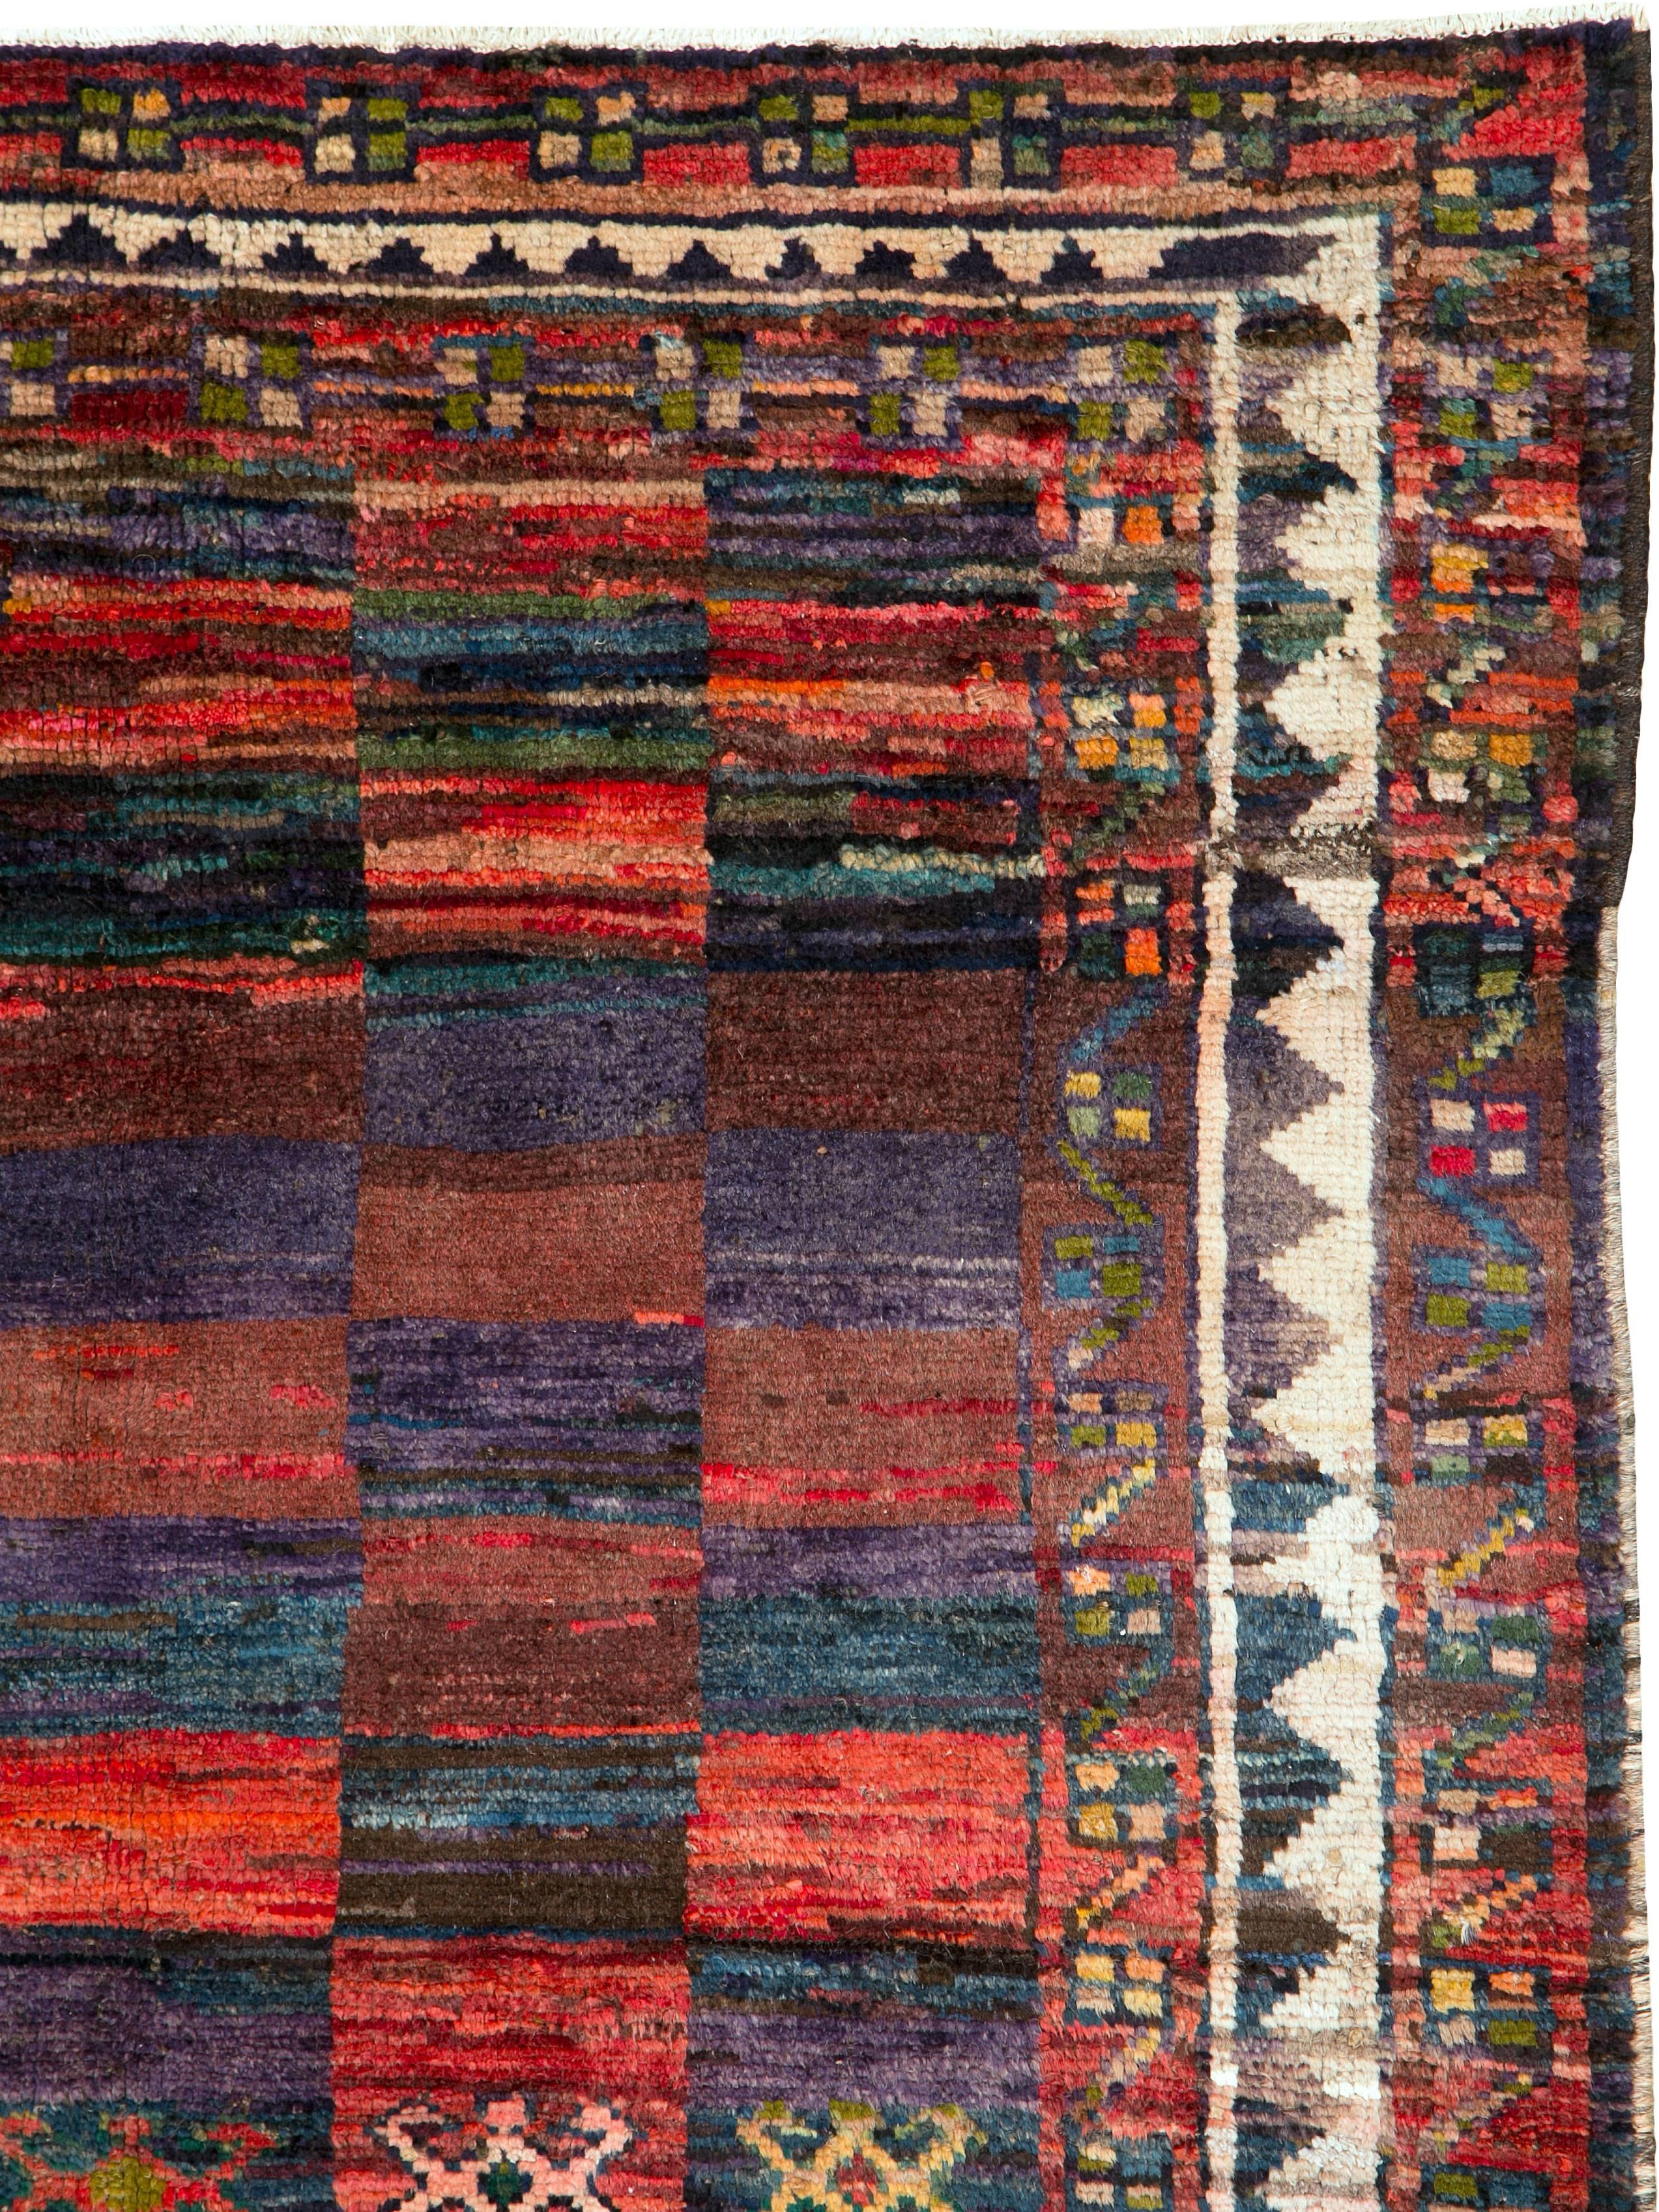 A vintage Persian gabbeh carpet from the mid-20th century.